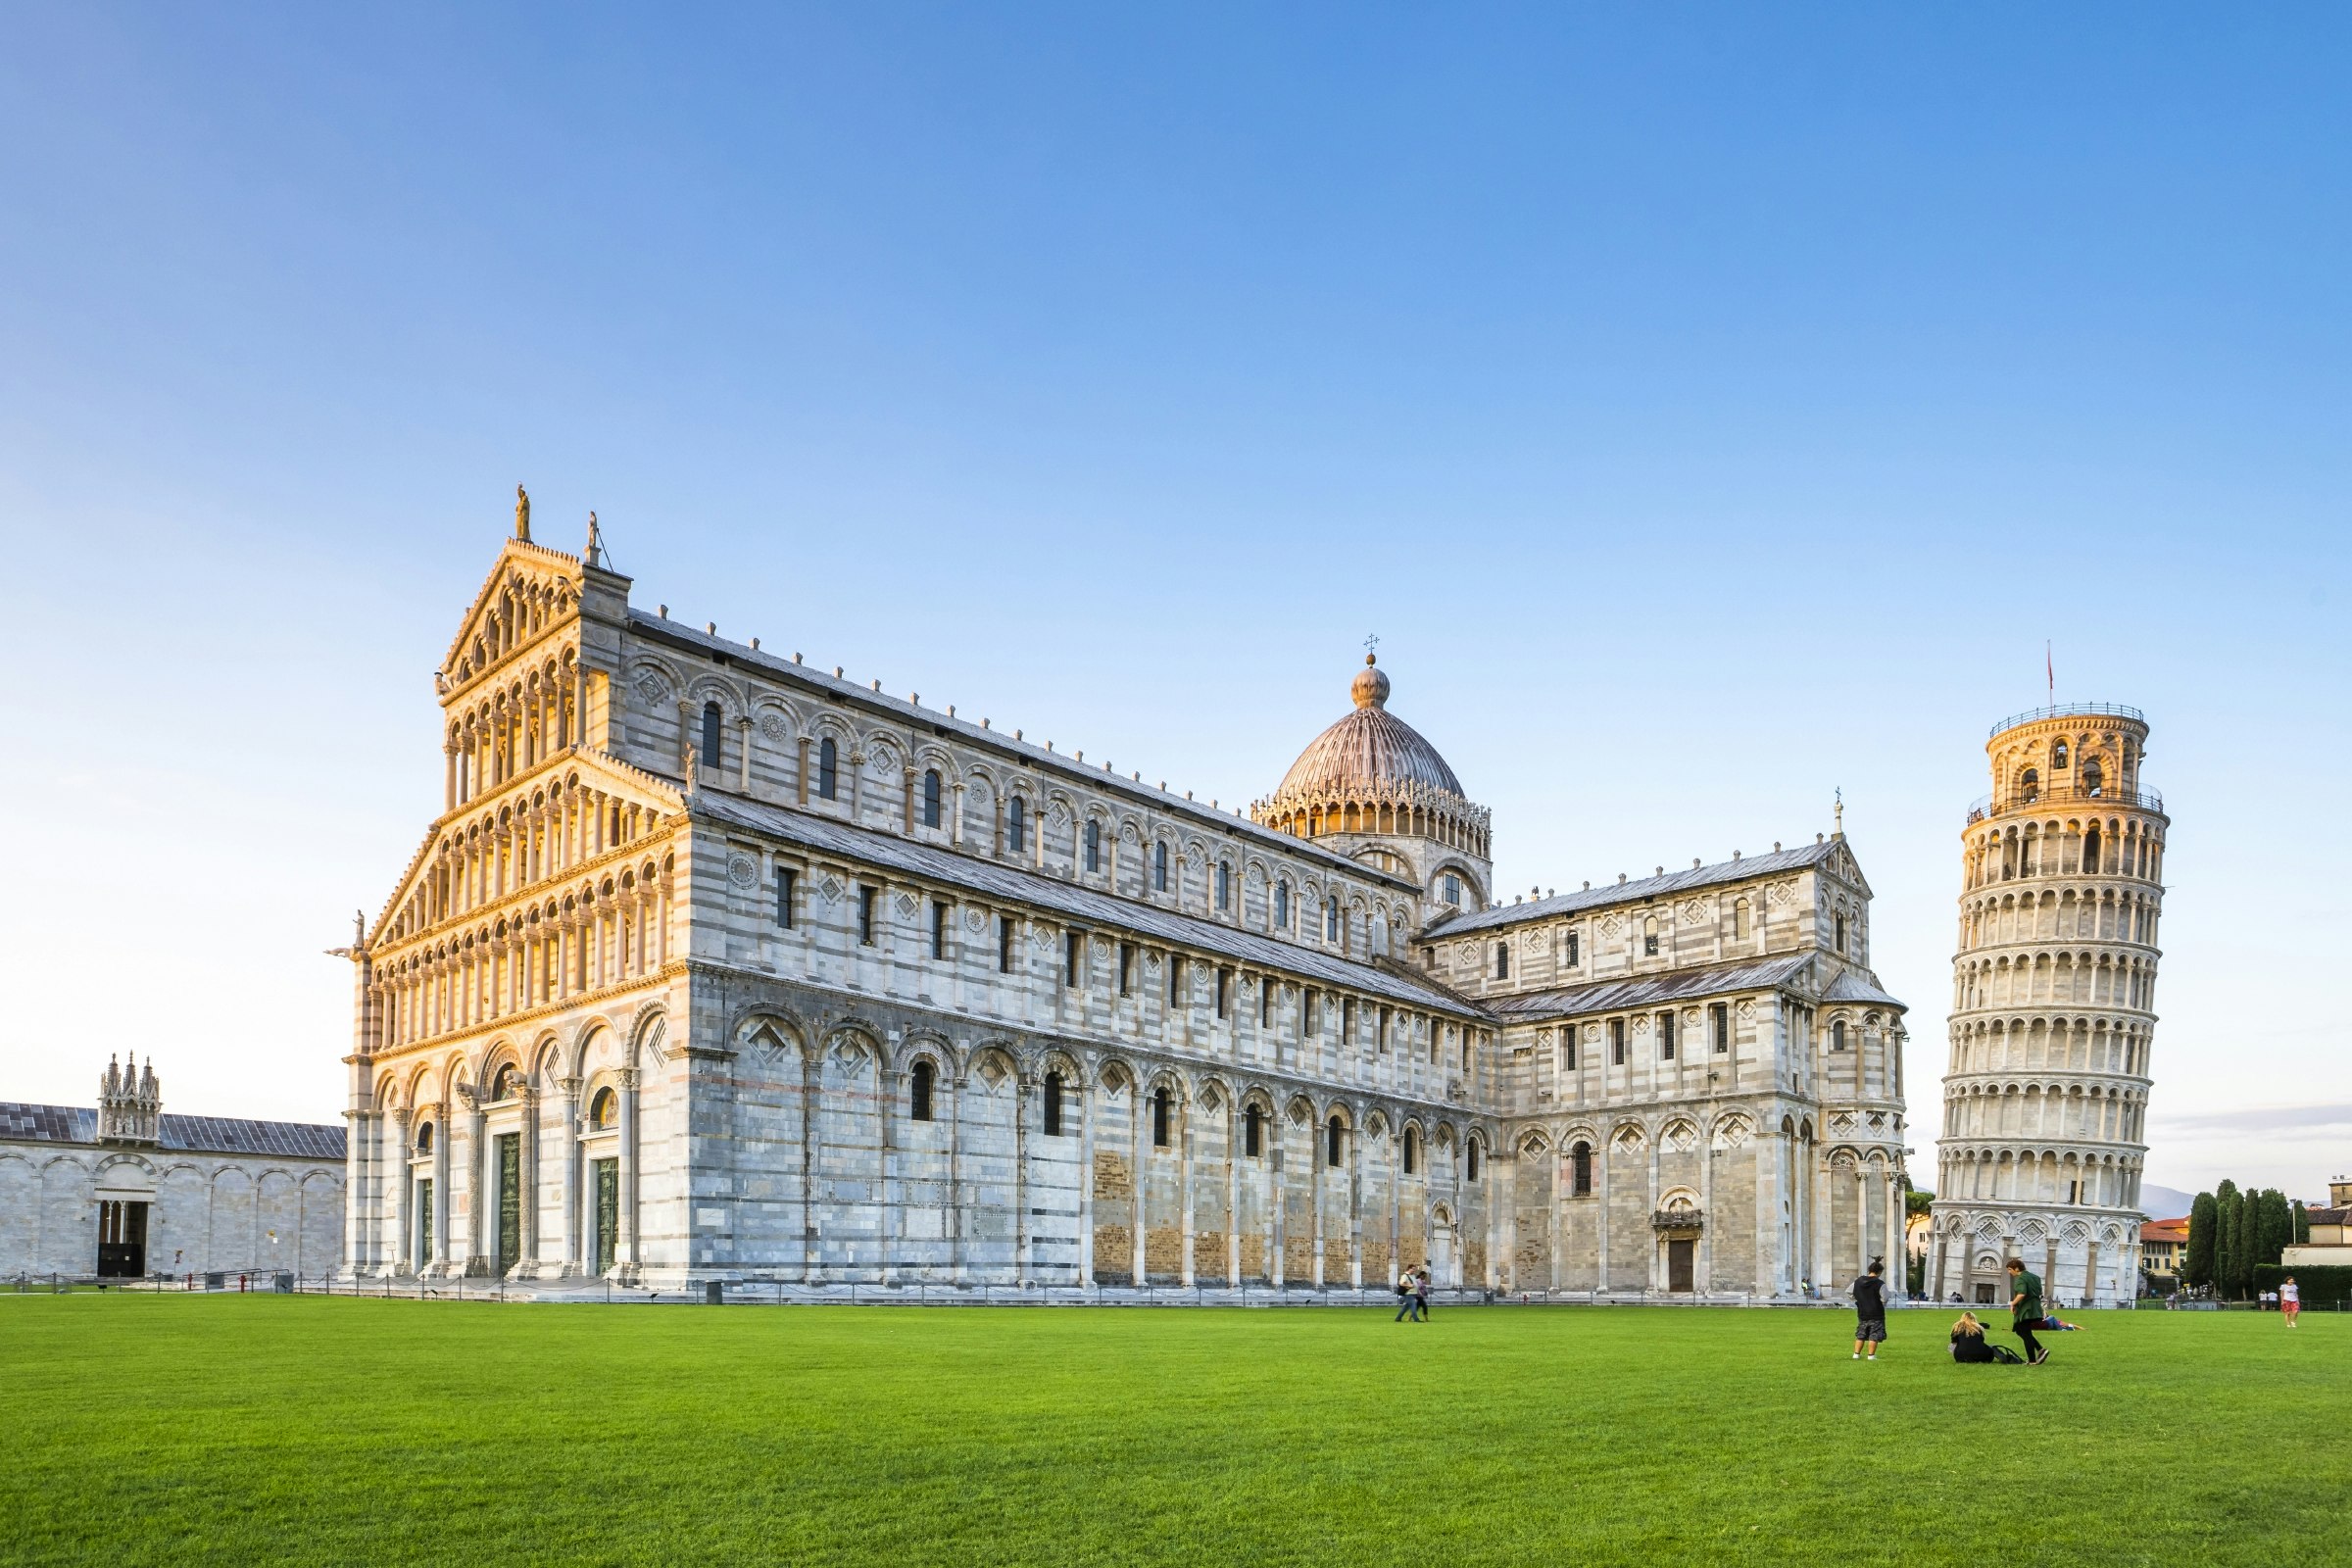 Travel News - "Italy, Tuscany, Pisa, View to Cathedral and Leaning Tower of Pisa at Piazza dei Miracoli"